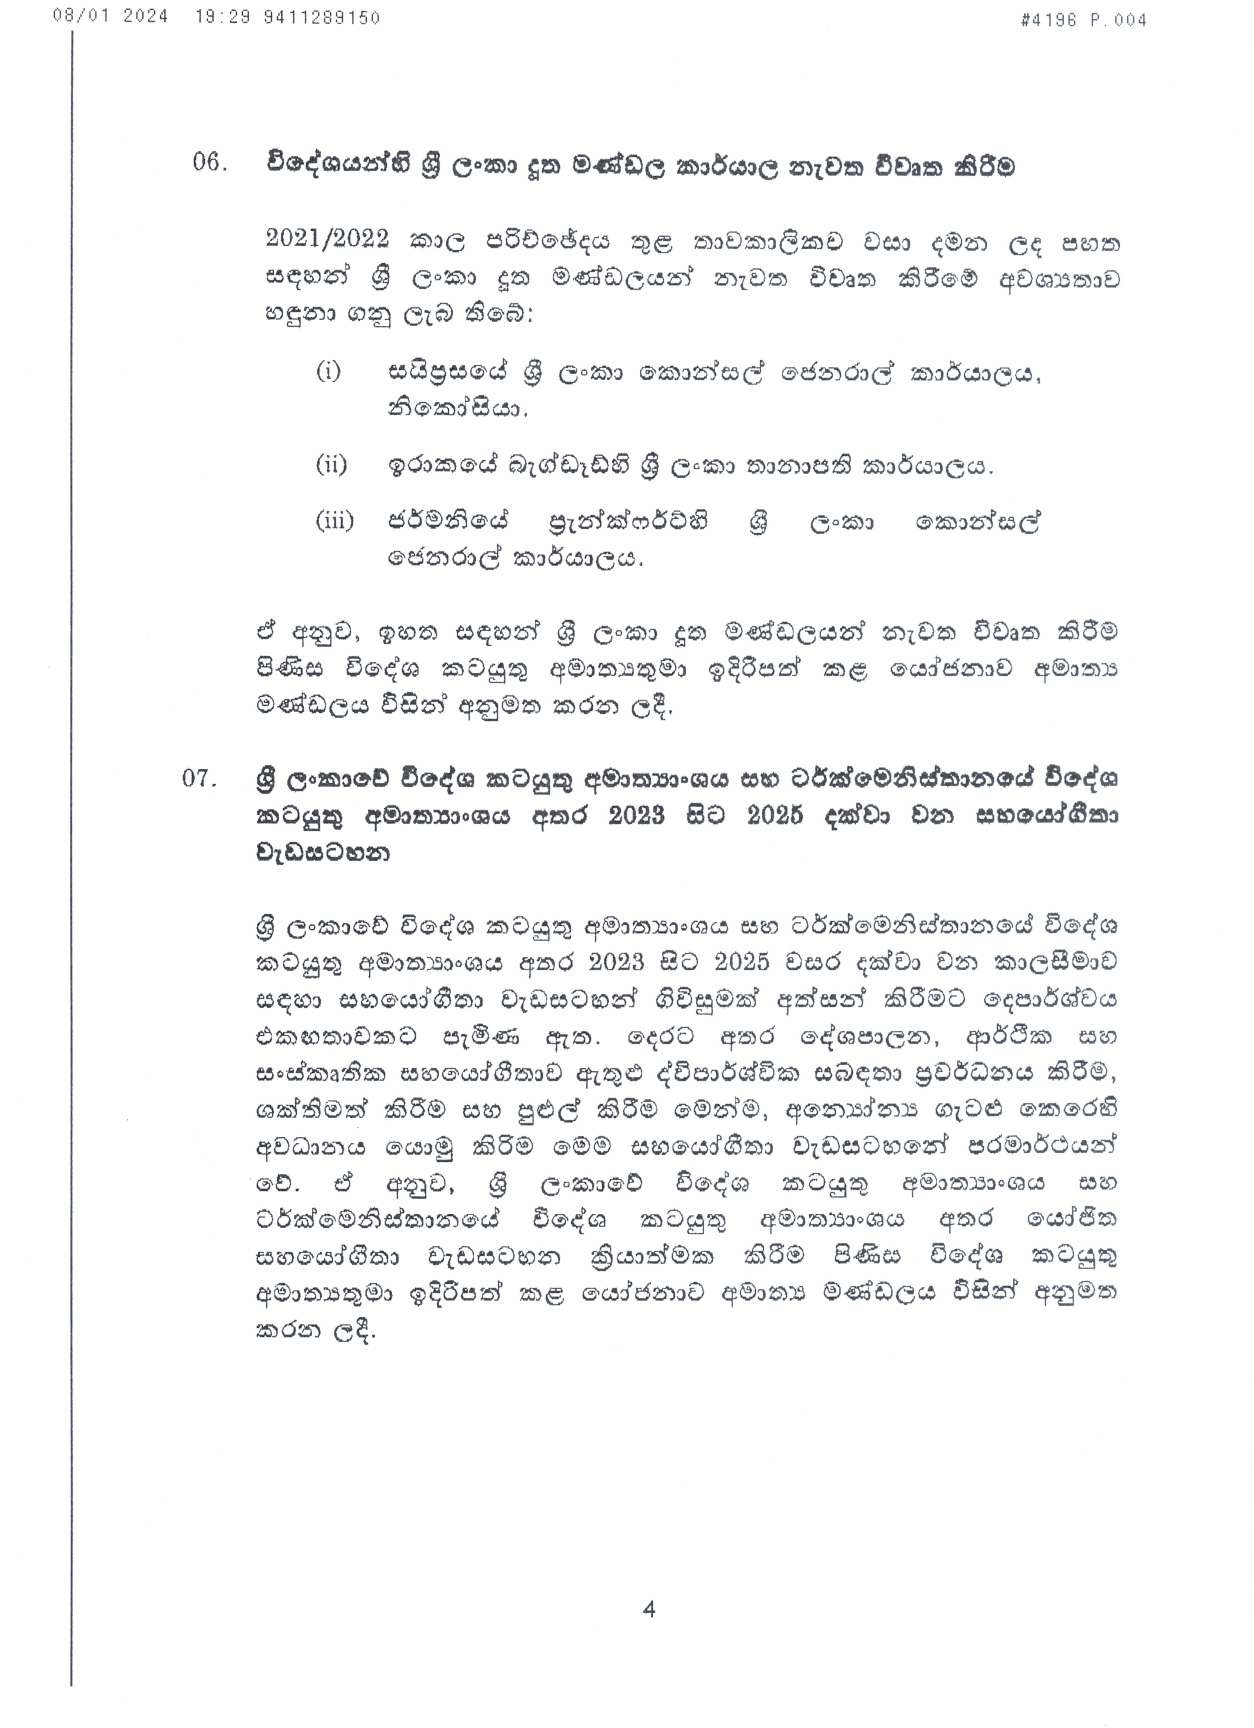 Cabinet Decision on 08.01.2024 1 page 0004